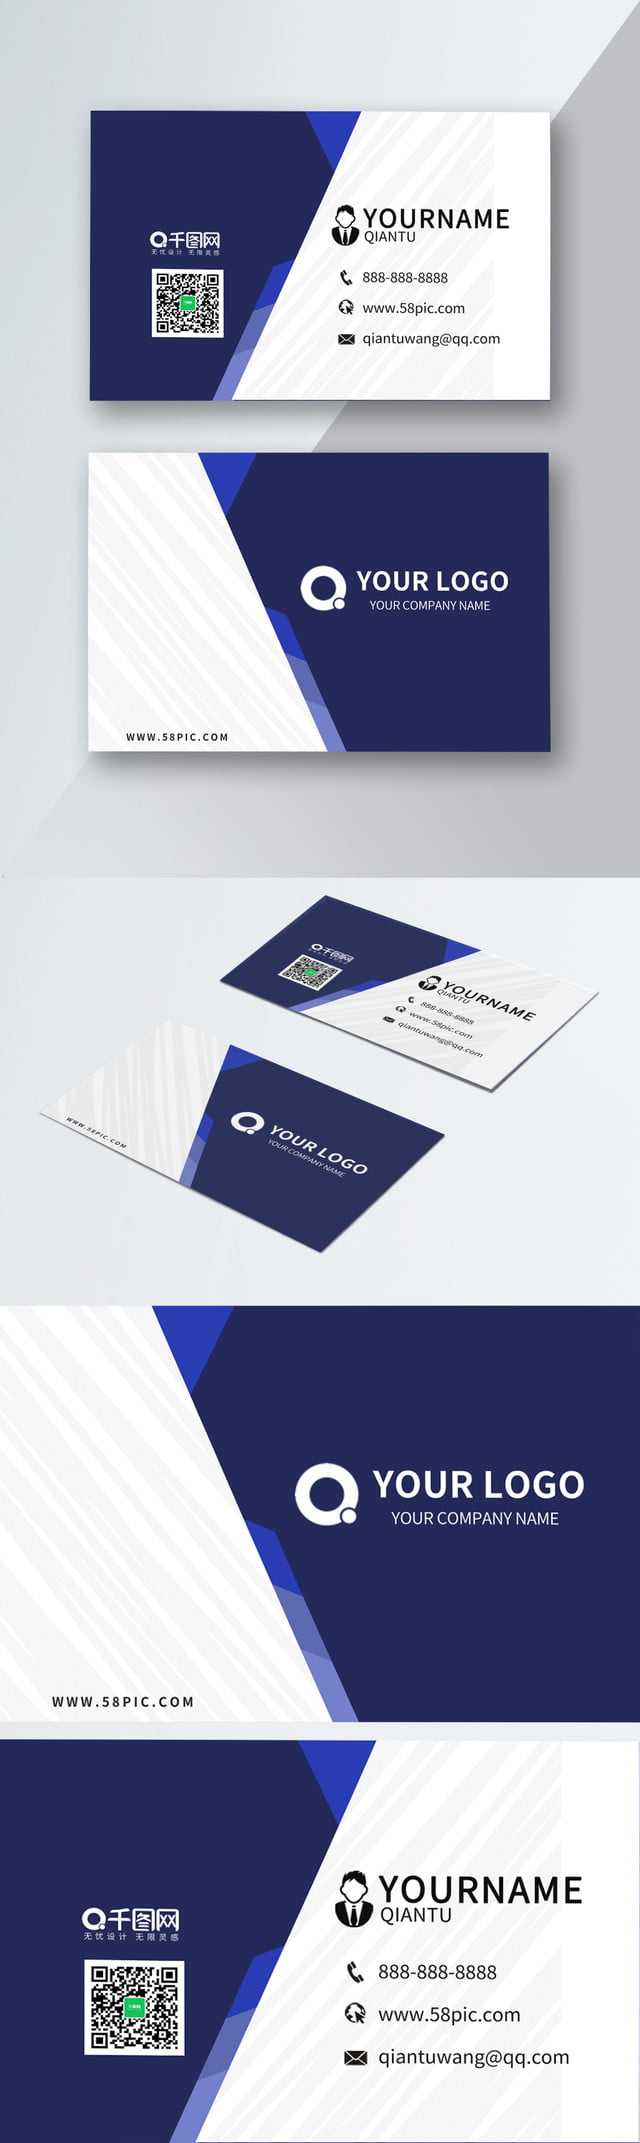 Transport Business Card Express Business Card Car Vehicle In Transport Business Cards Templates Free